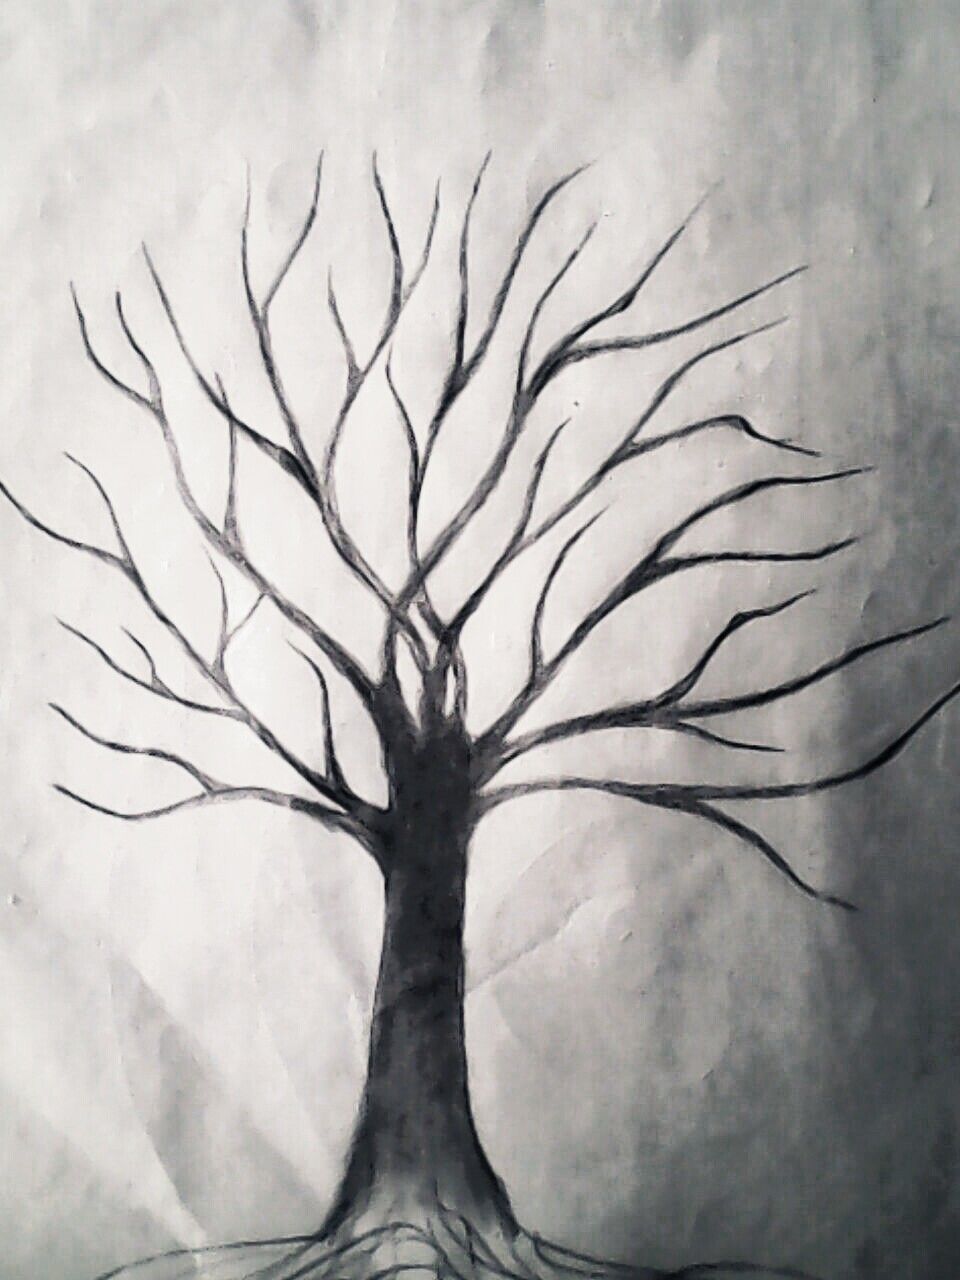 How Do You Draw A Tree Without Leaves